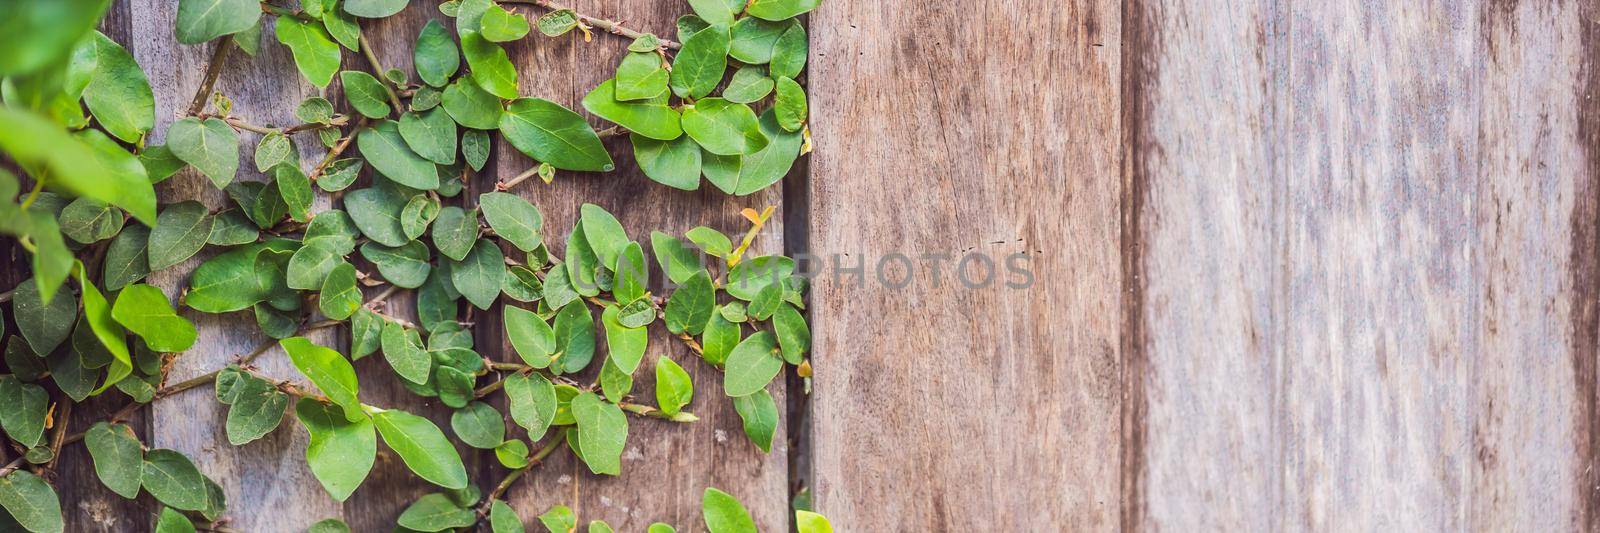 Texture of the old wooden fence and lash plants. BANNER, LONG FORMAT